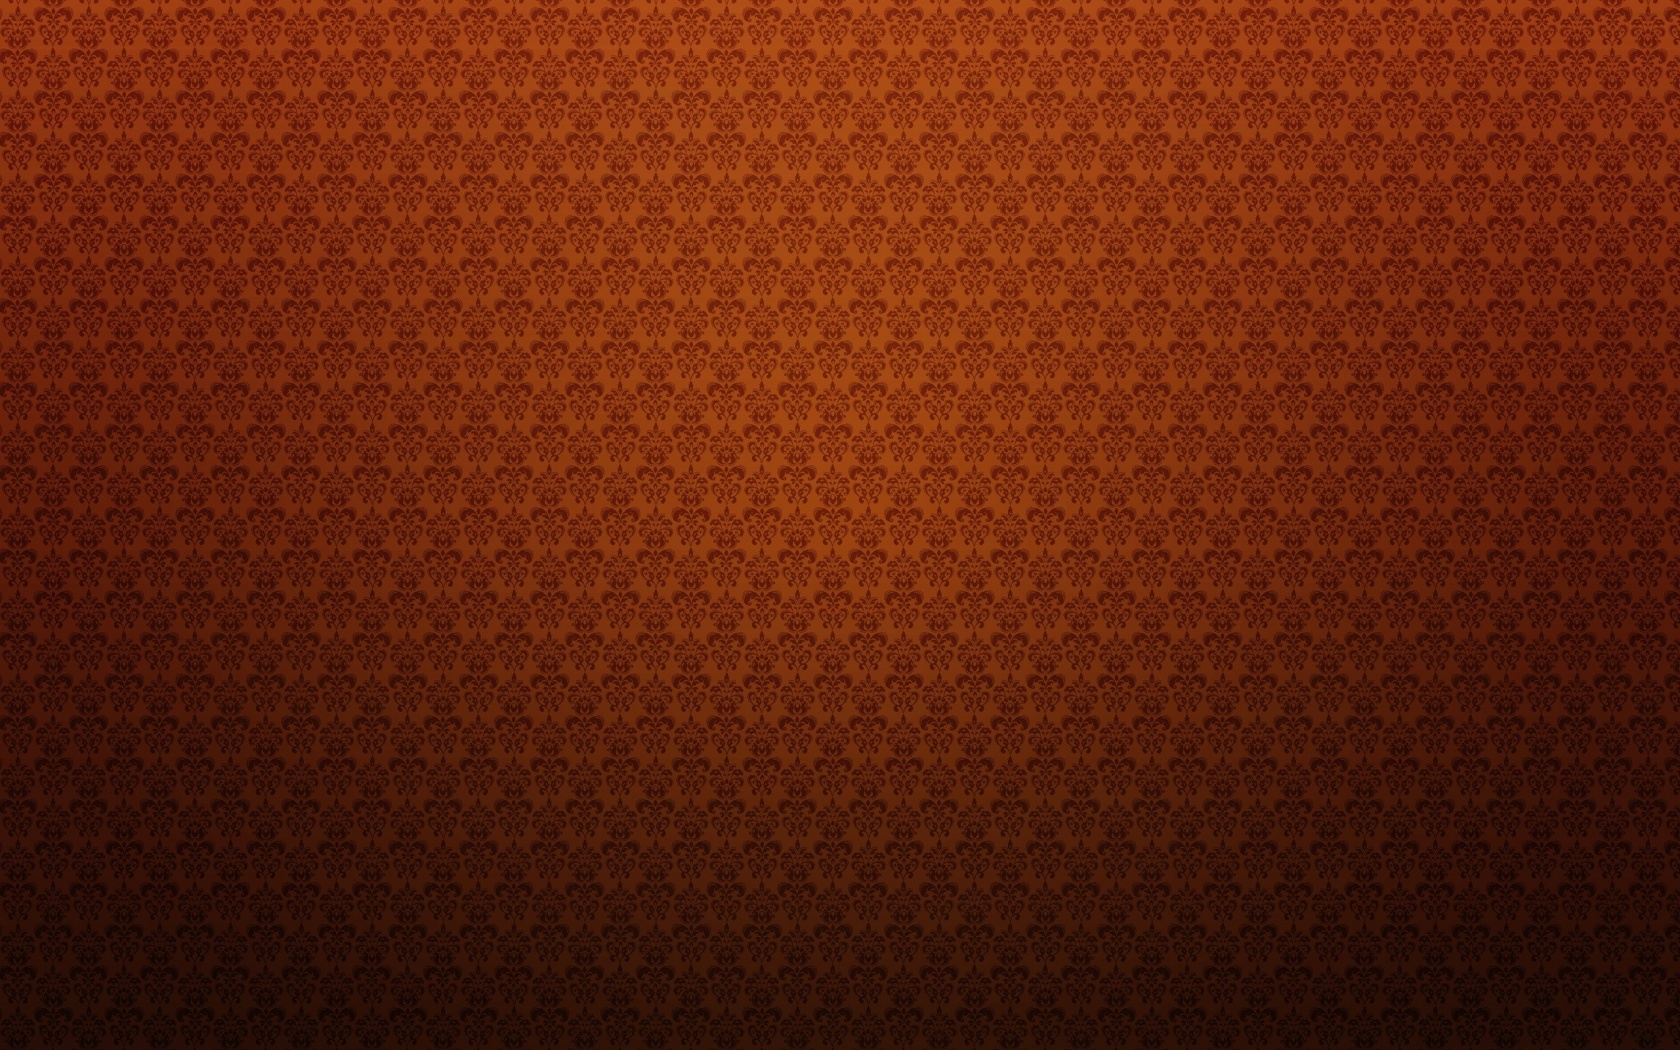 Patterns Light Colorful Texture Background